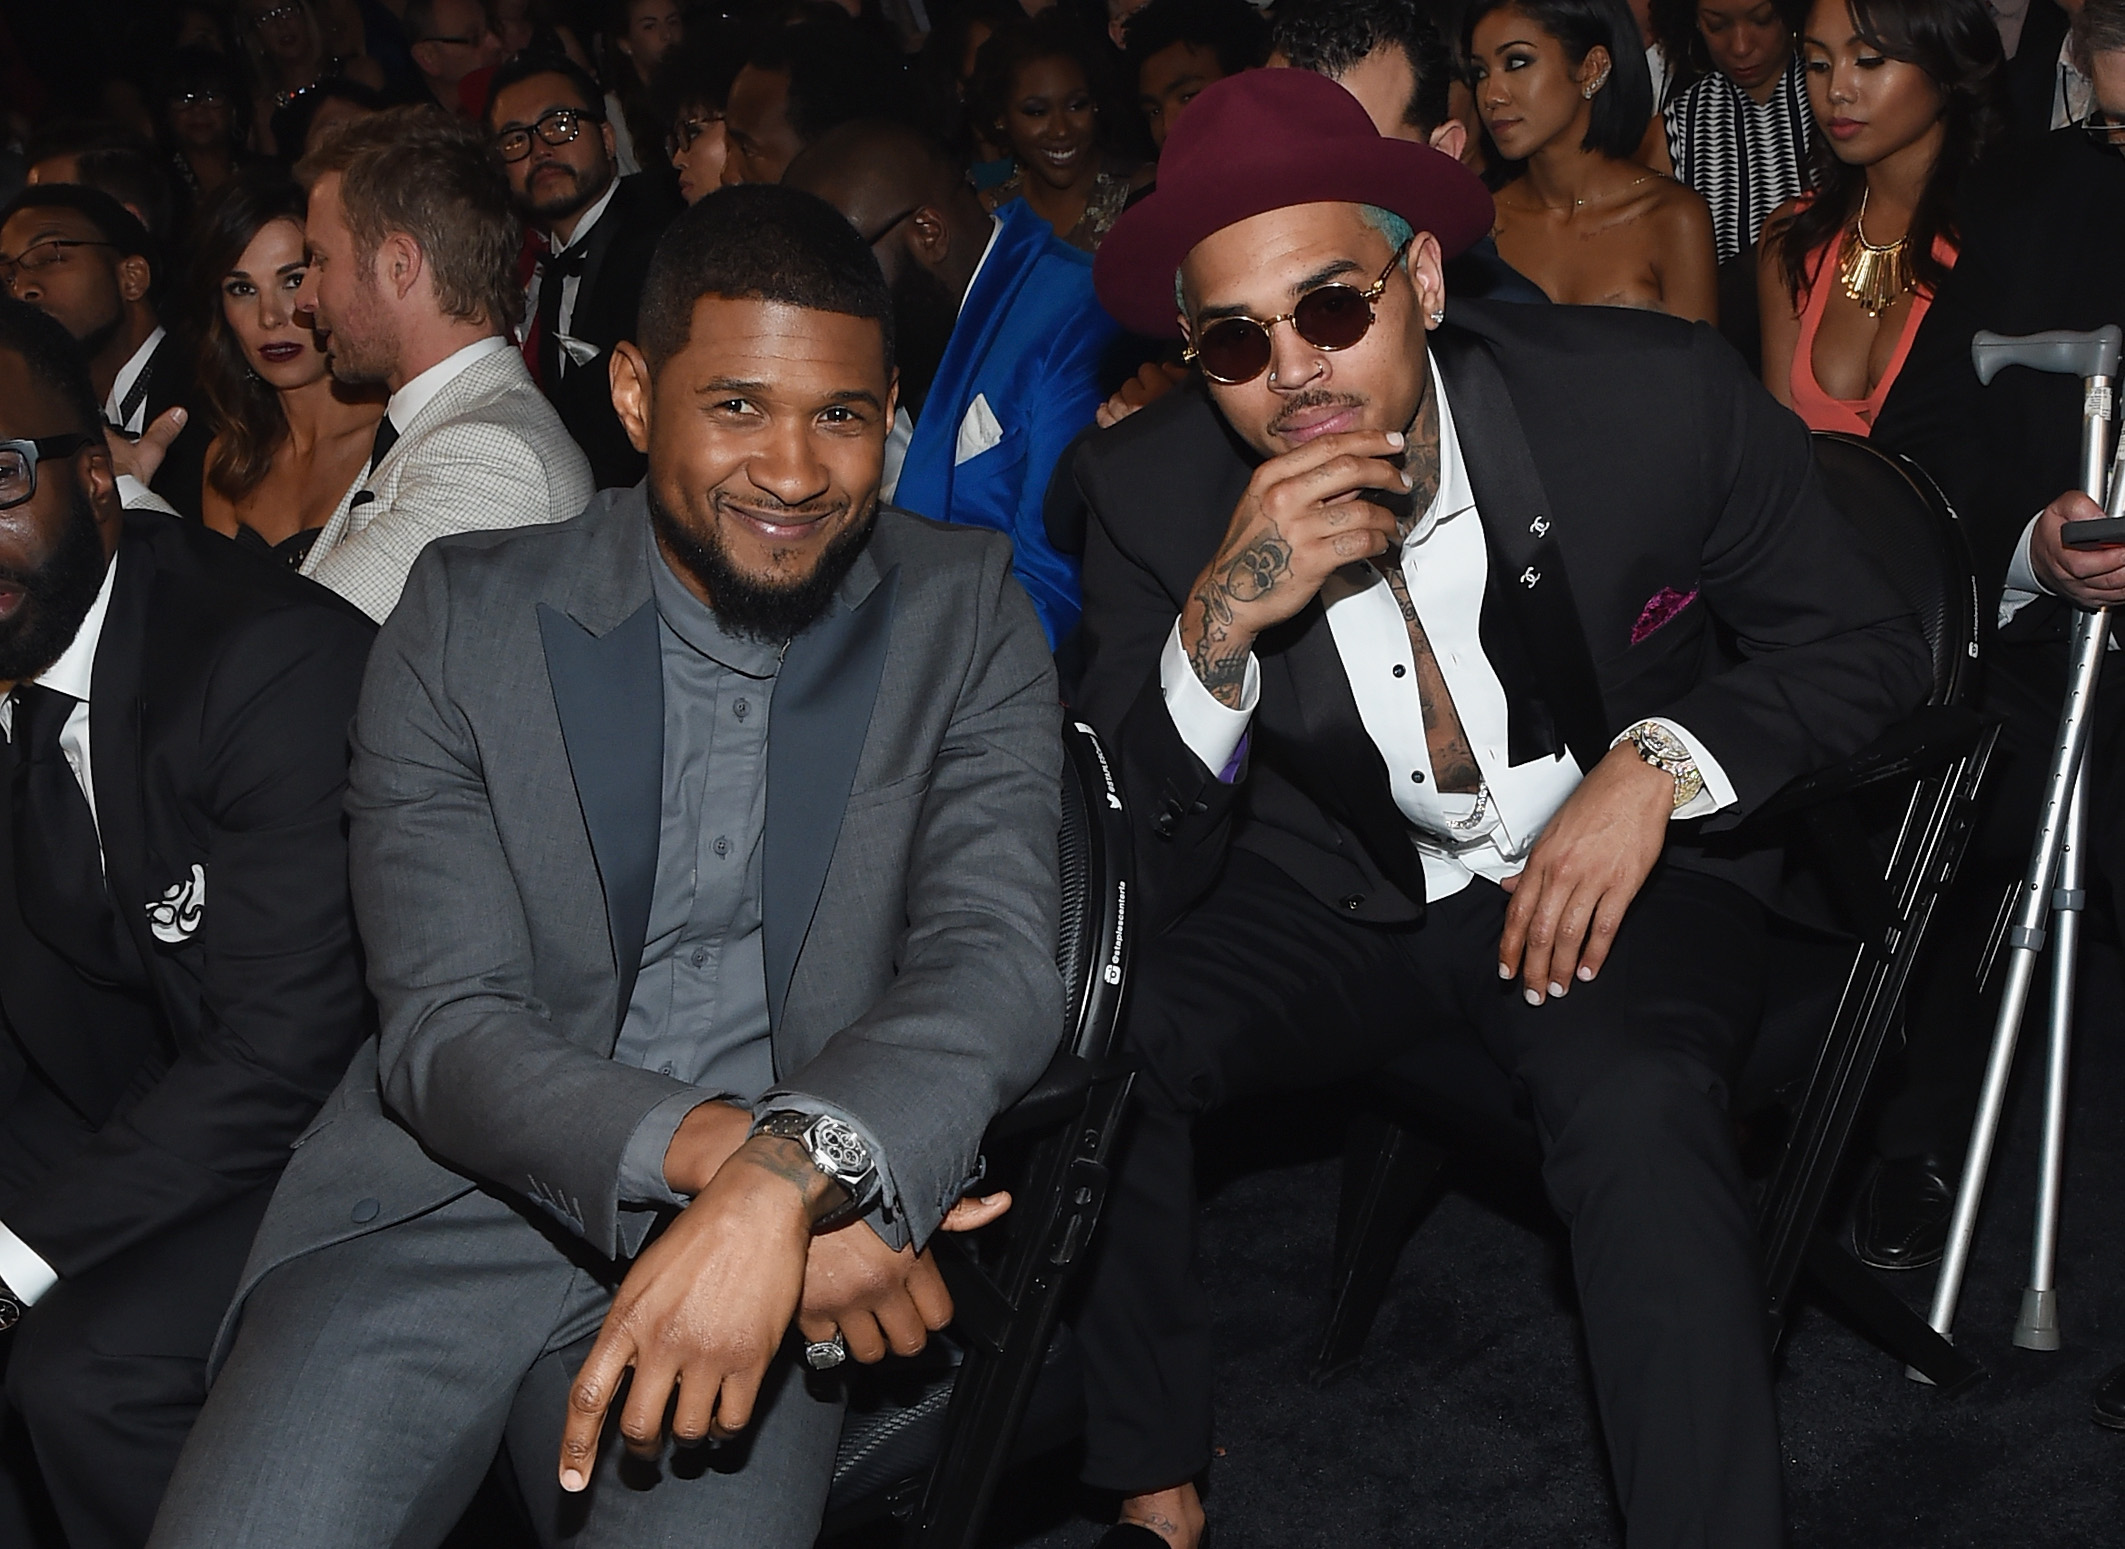 Chris Brown and Usher Grammy Awrads 2015